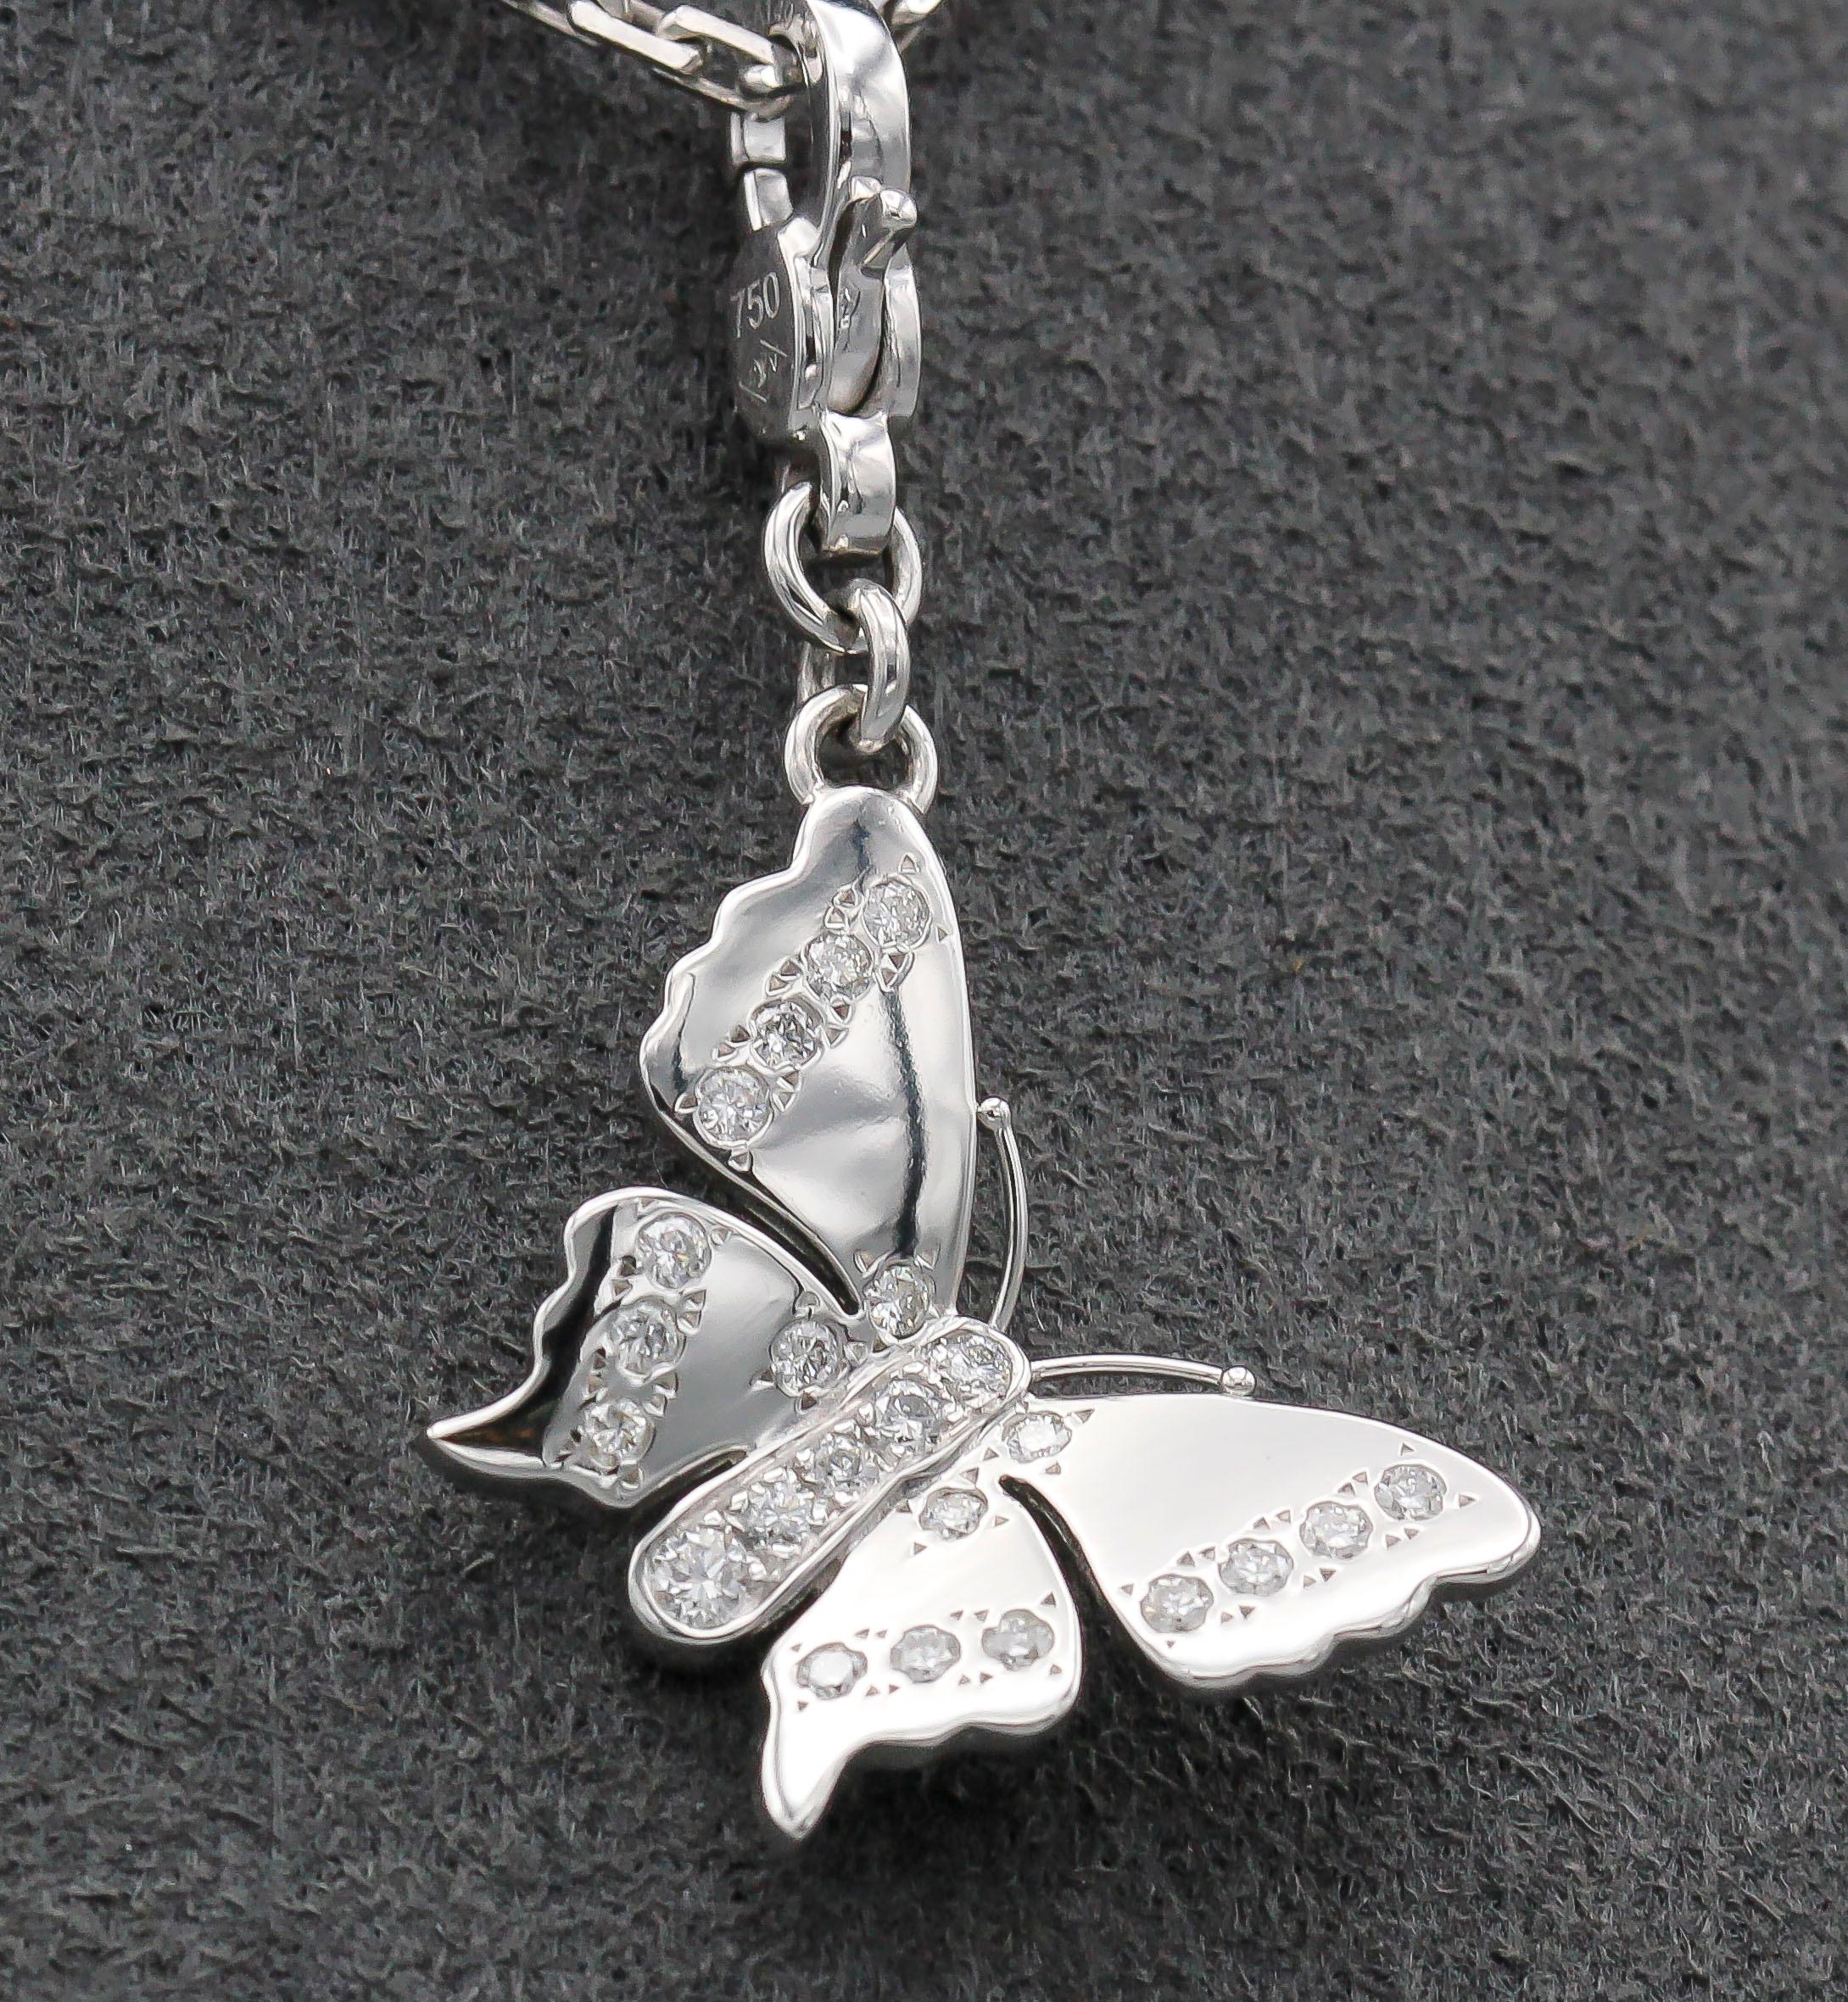 Fine diamond and 18K white gold butterfly charm by Louis Vuitton. It features higrade diamonds on the body and wings of the butterfly.  Well made and easy to add to any bracelet or pendant.

Hallmarks: LV, 750 reference numbers, maker's mark